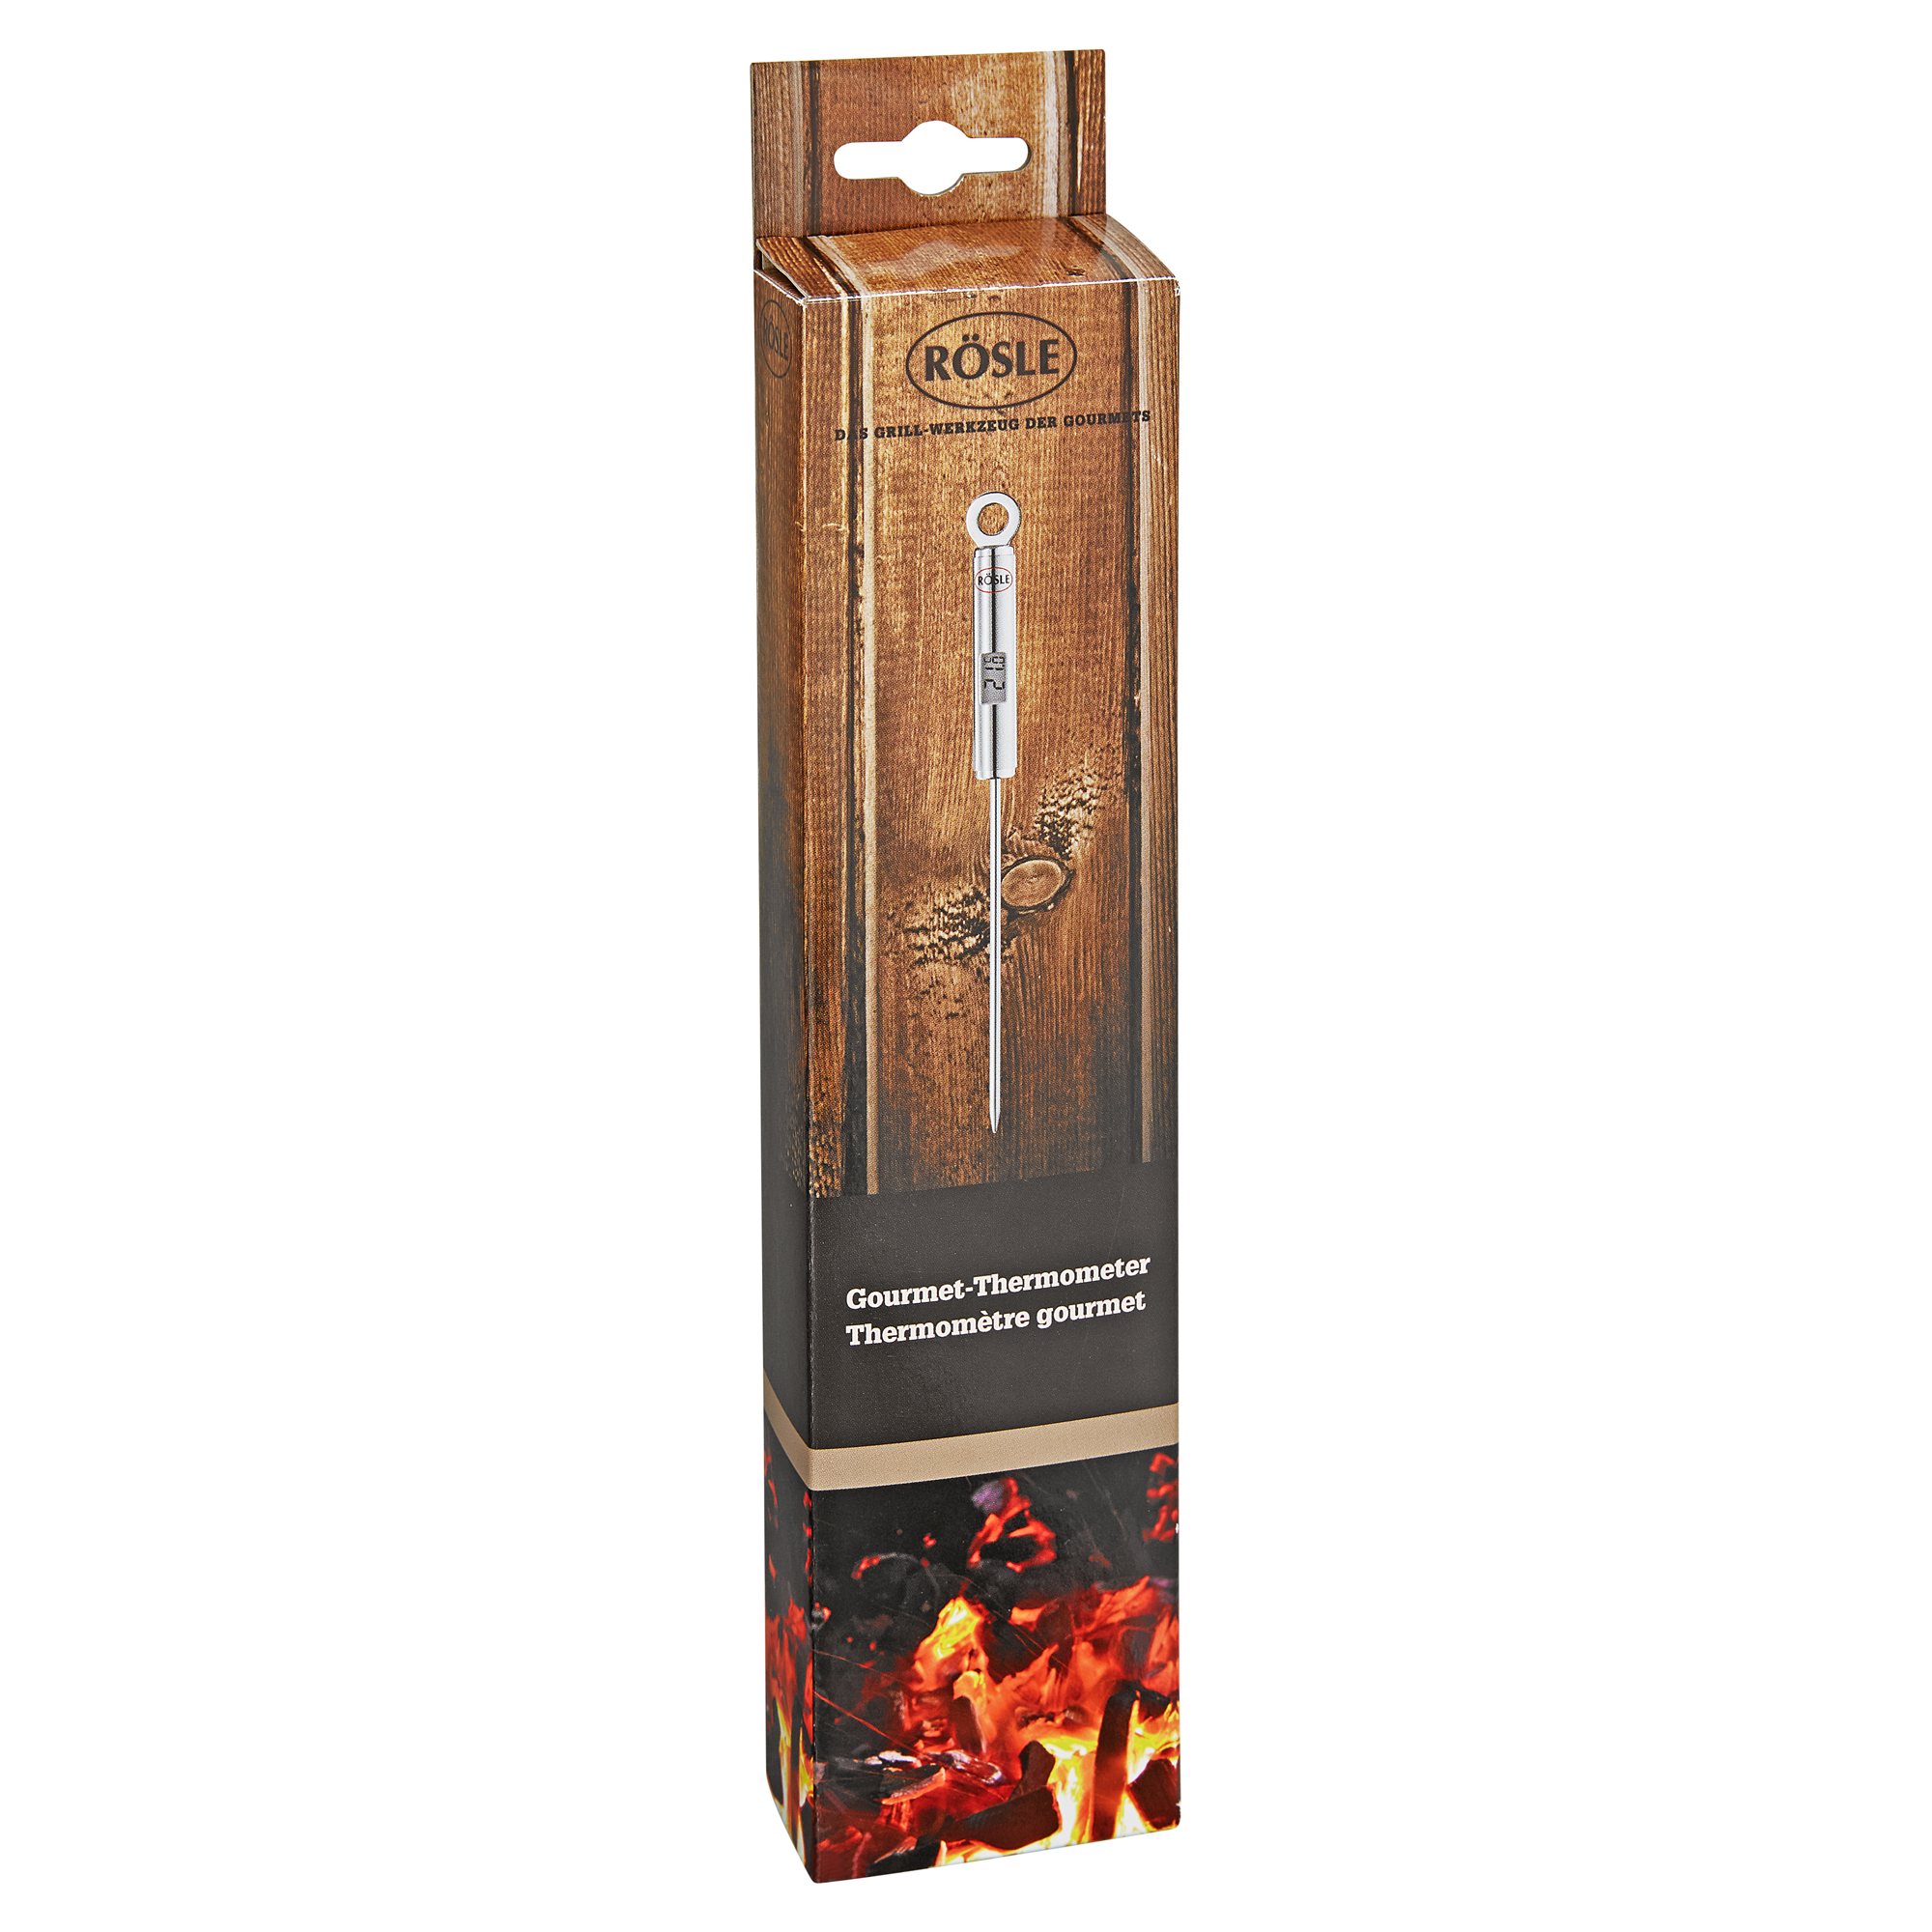 Gourmet-Thermometer Edelstahl + product picture